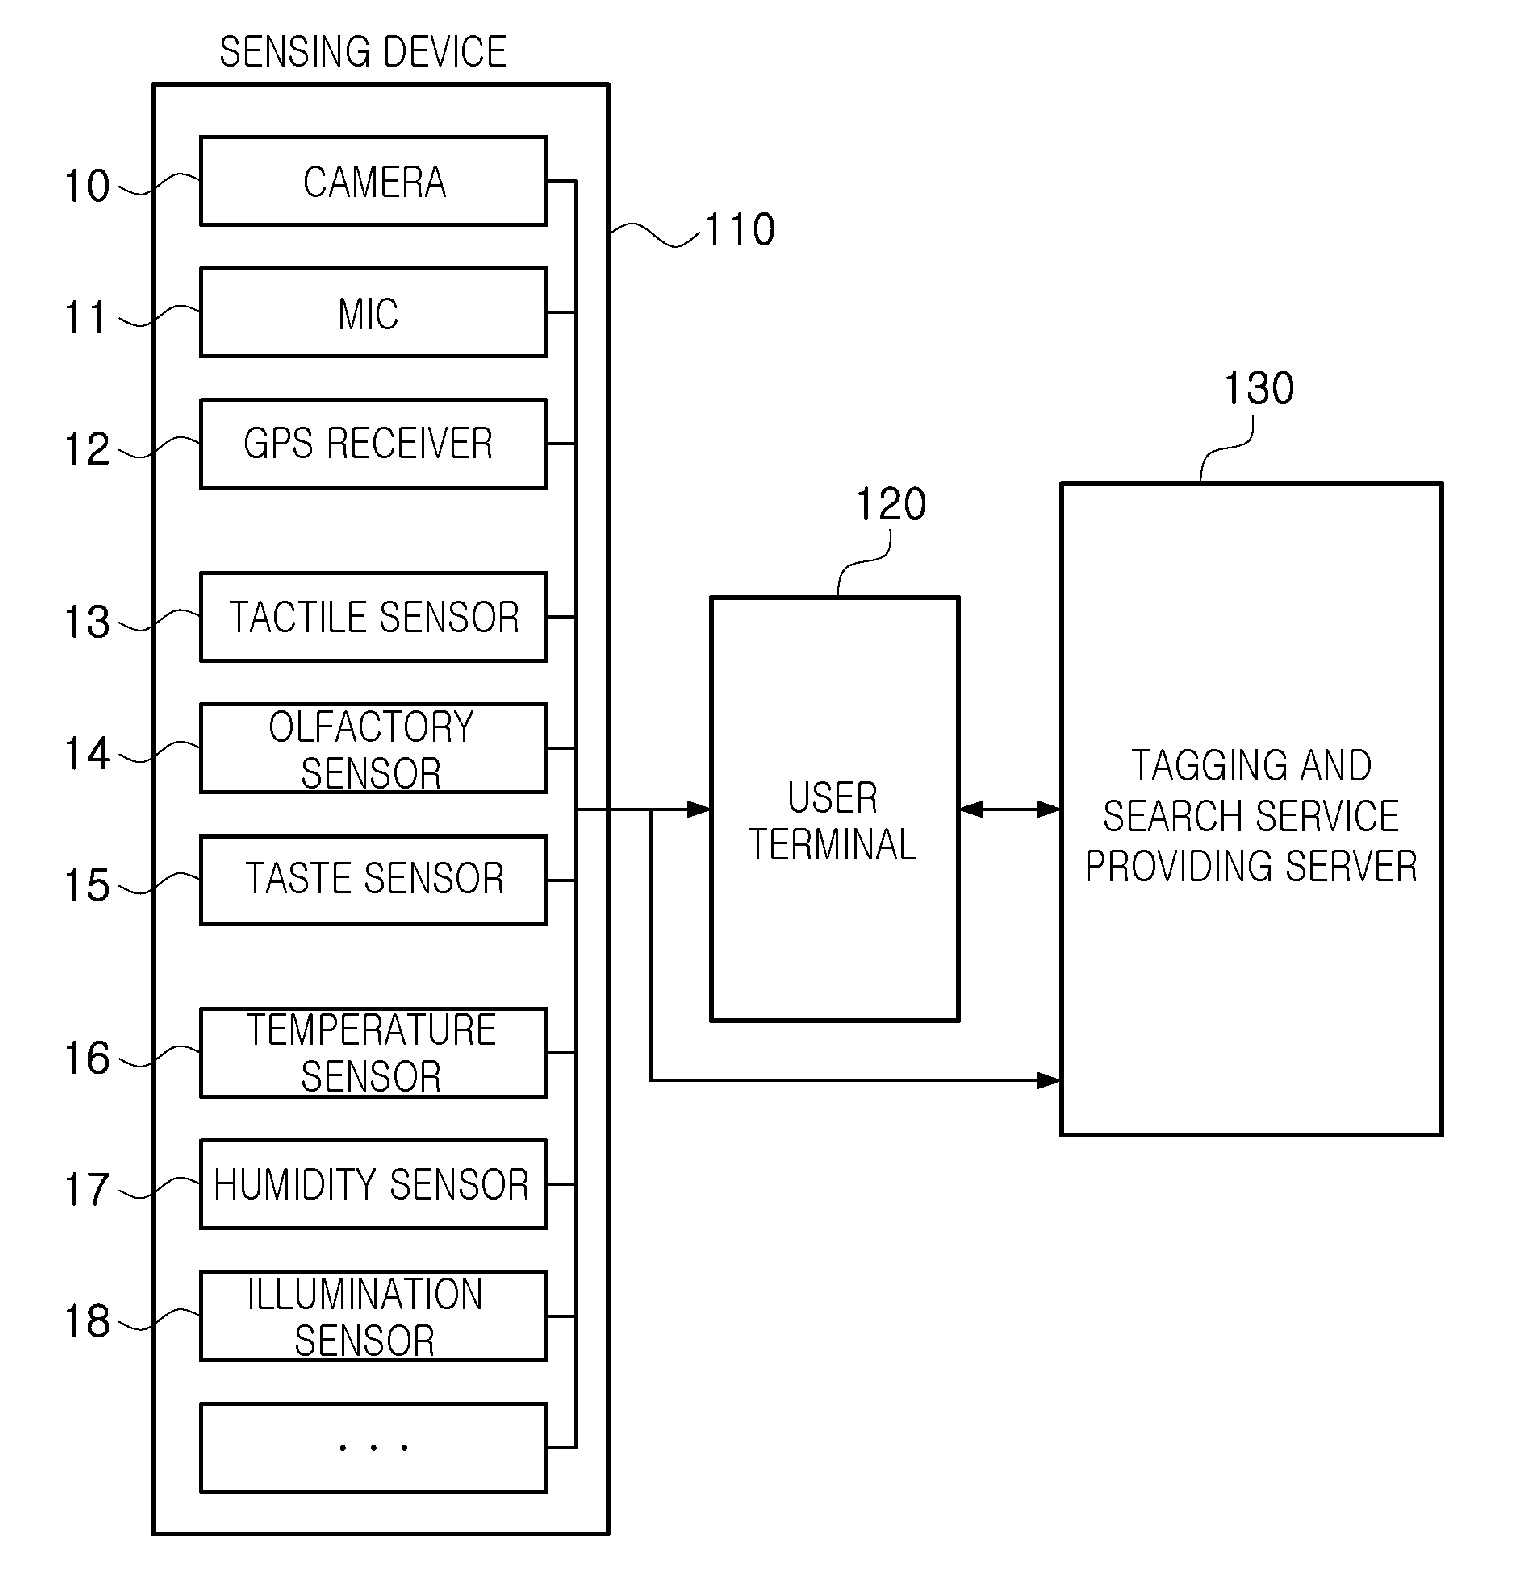 Digital data tagging apparatus, system and method for providing tagging and search service using sensory and environmental information